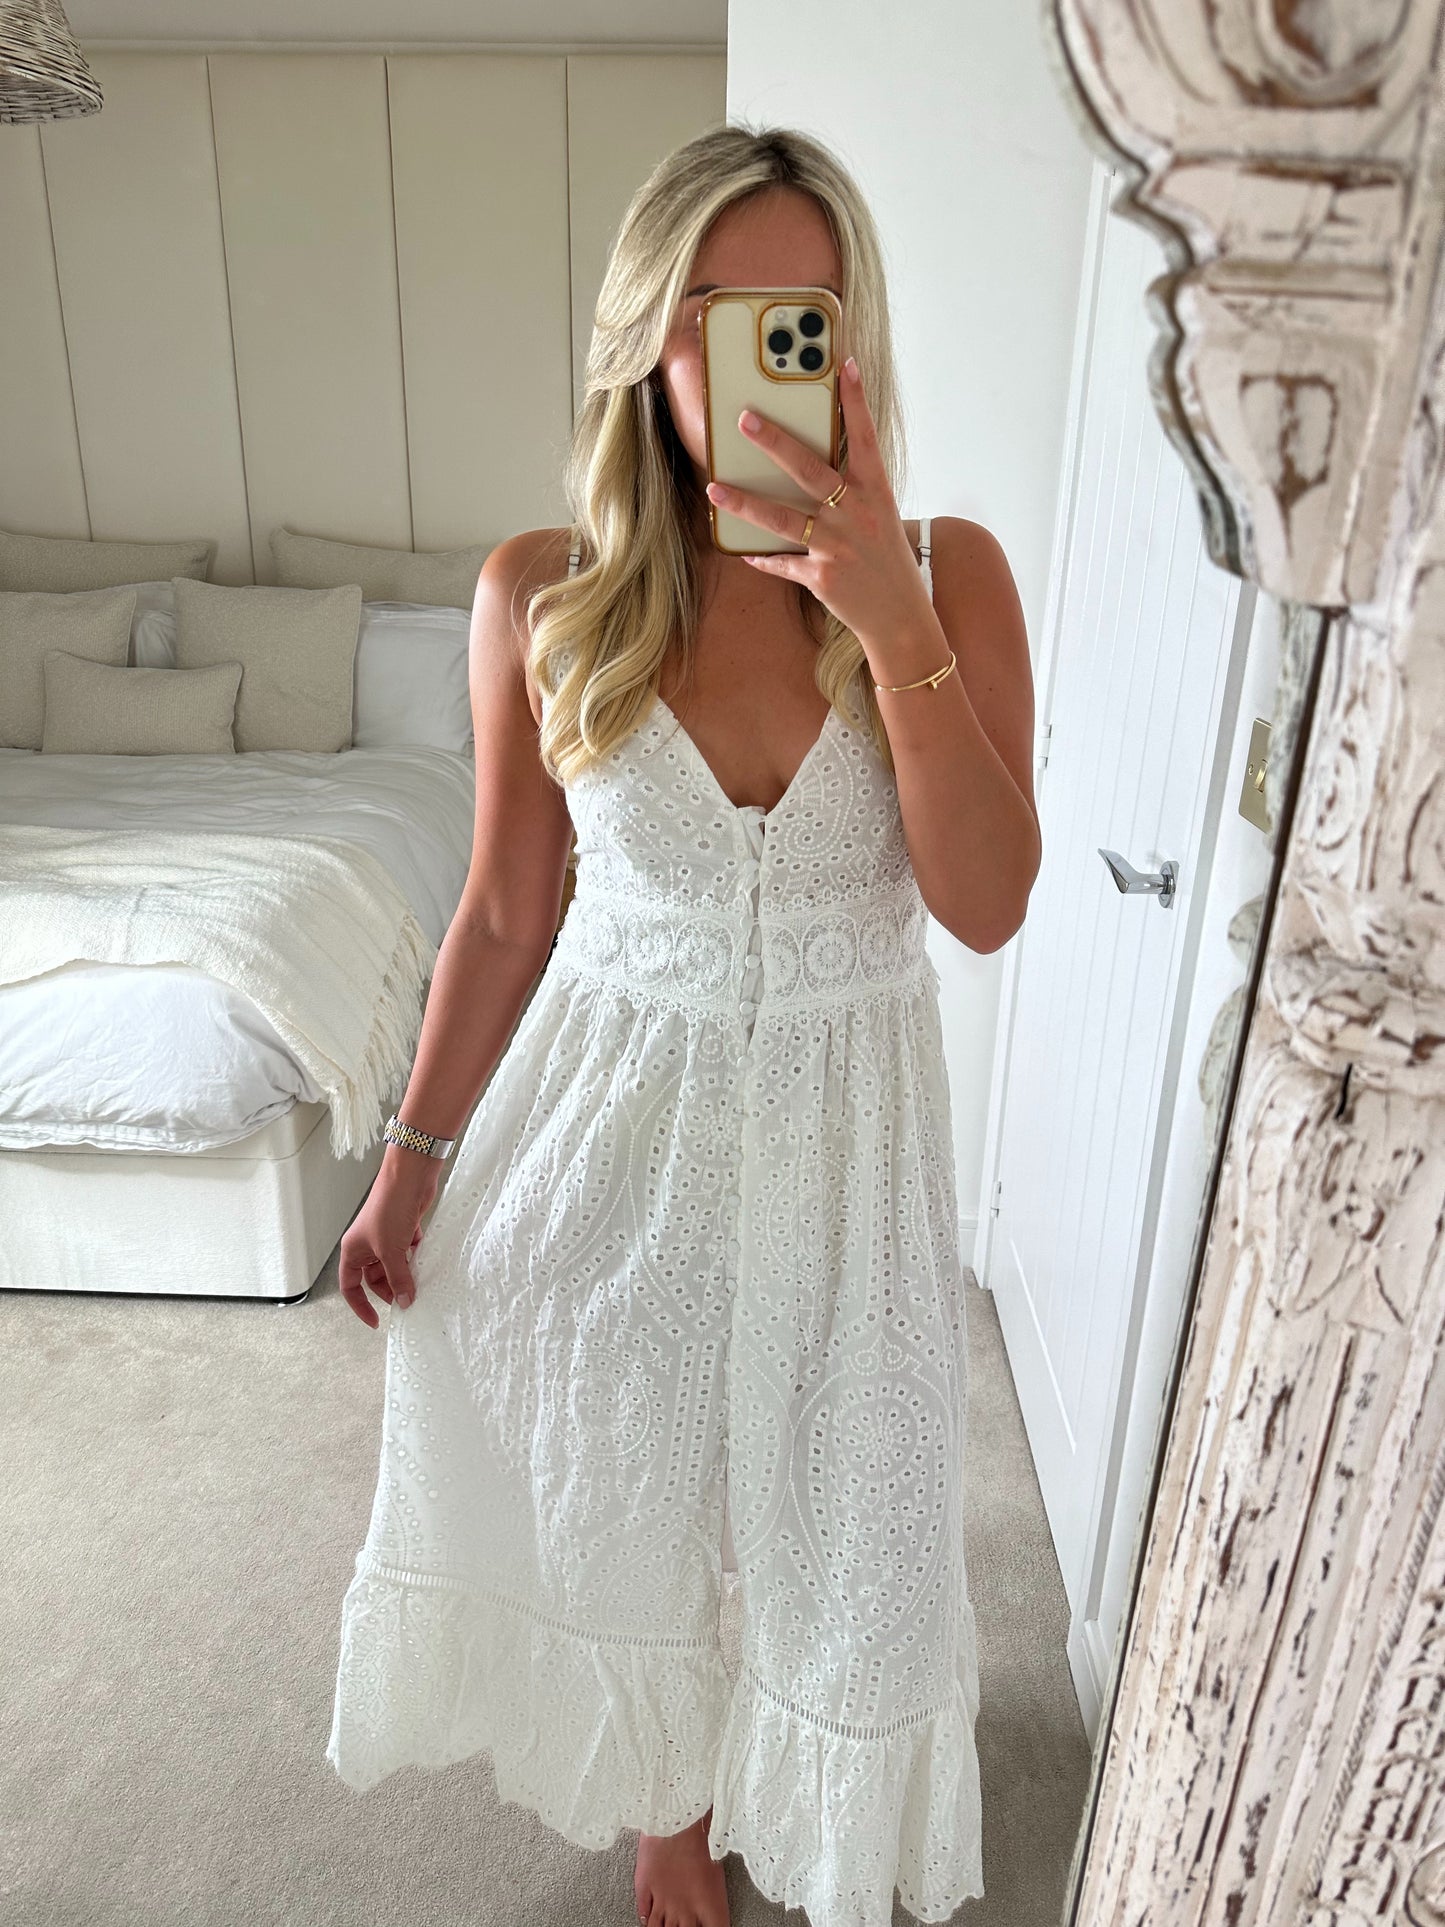 White Embroidery Dress